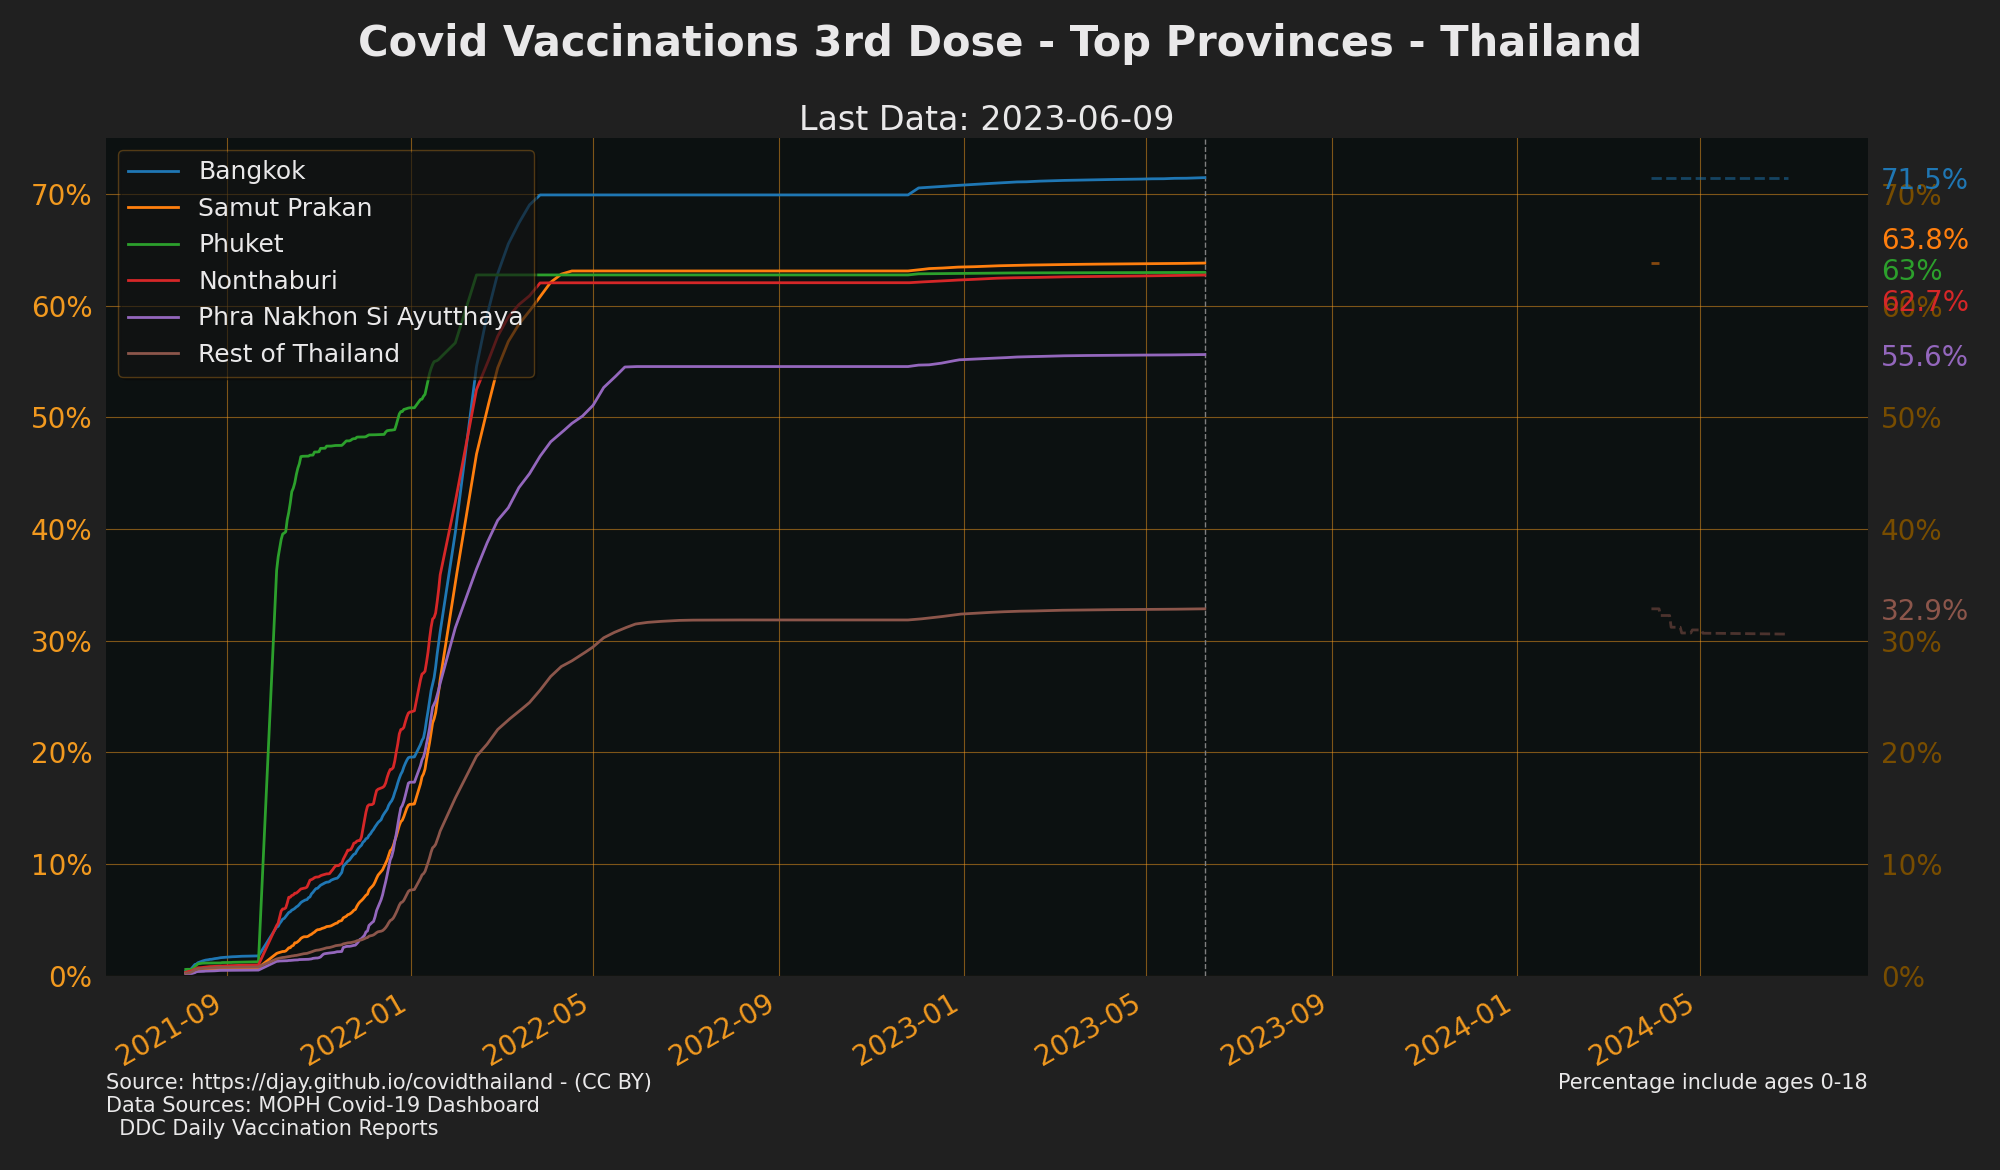 Top Provinces by Vaccination 3rd Jab